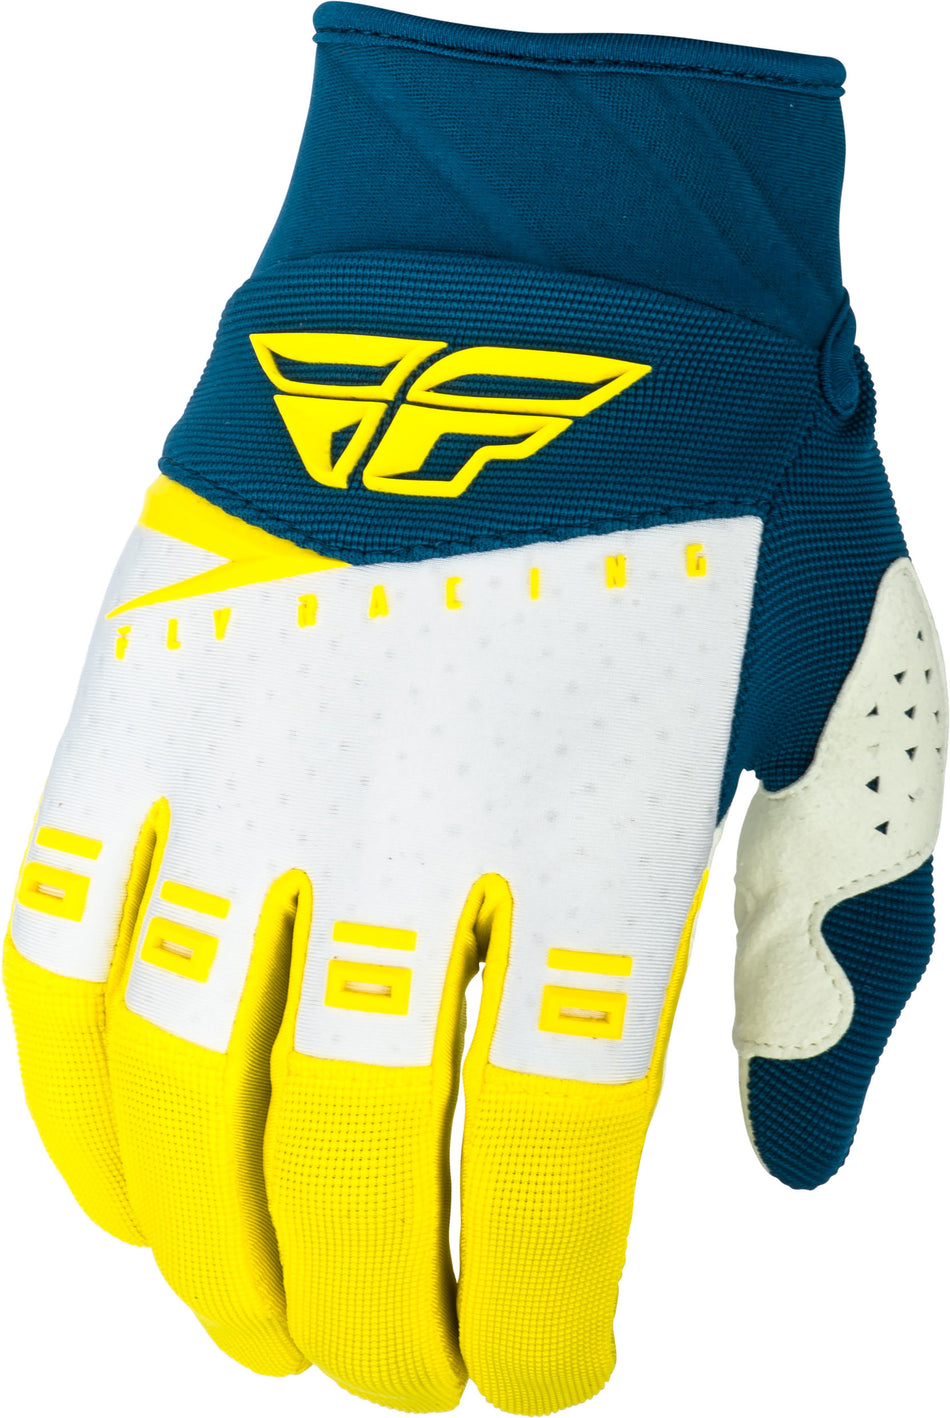 FLY RACING F-16 Gloves Yellow/White/Navy Sz 10 372-91310